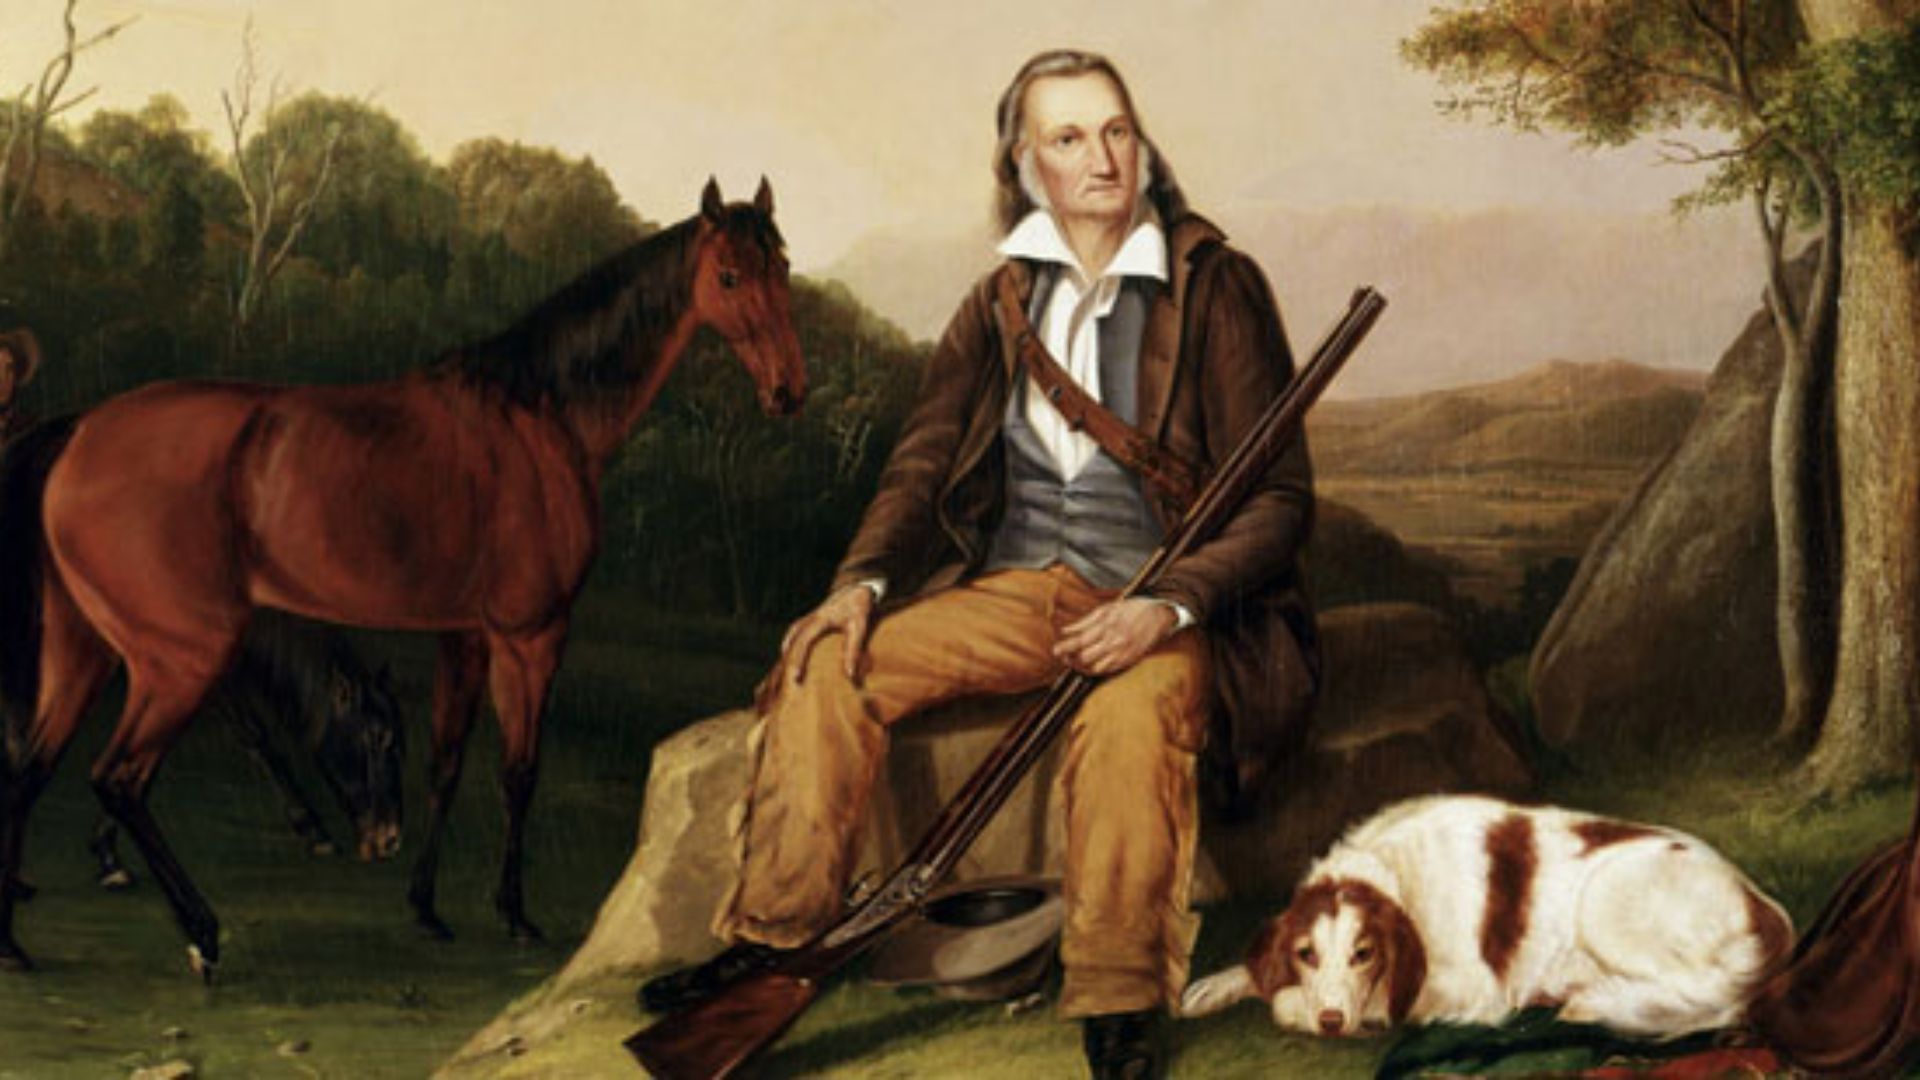 Painting Of John James Audubon Holding A Rifle With His Horse And Dog